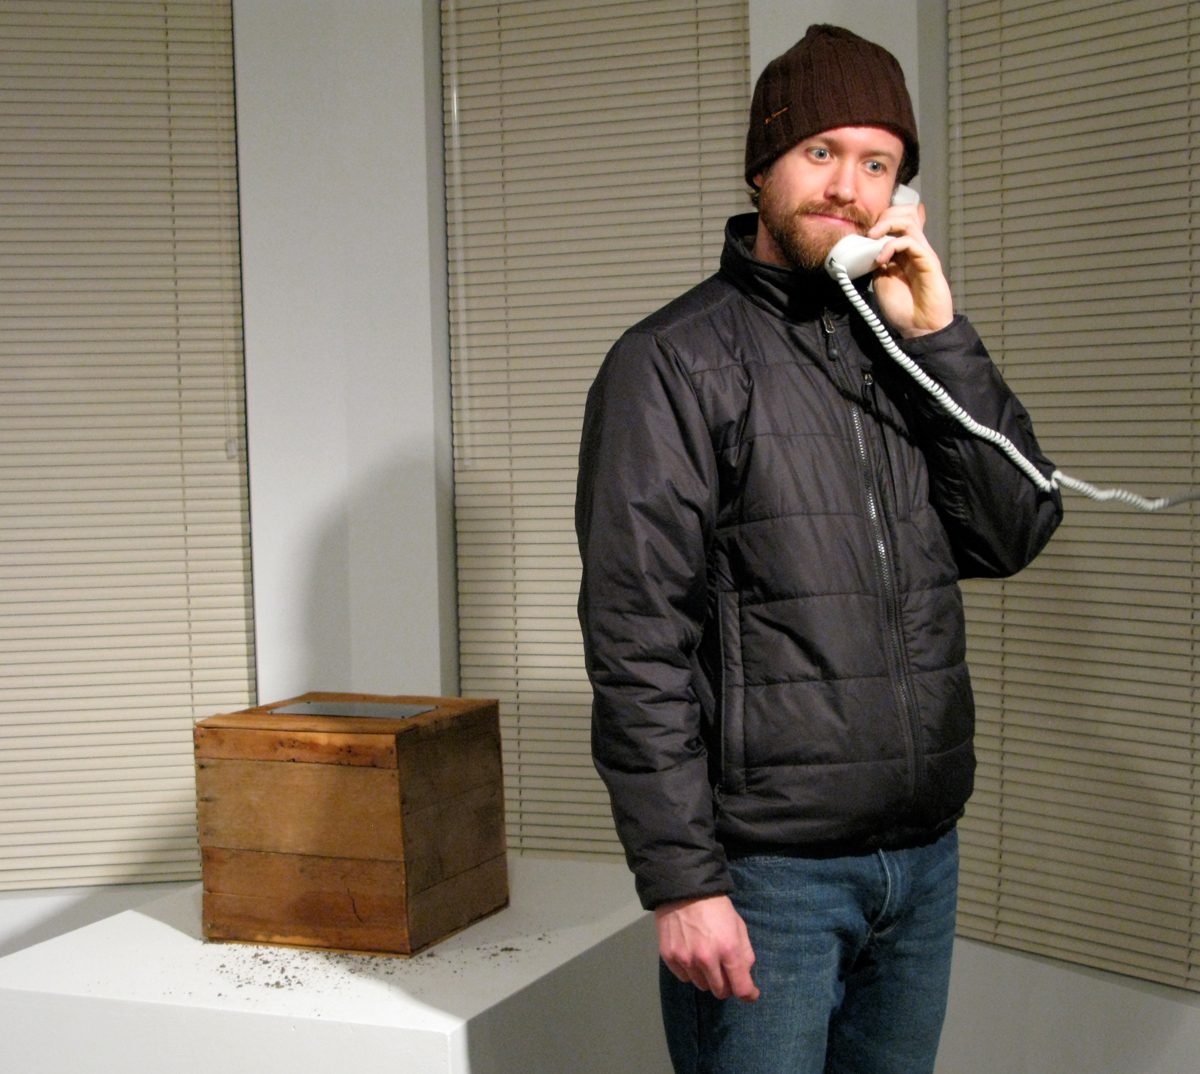  a man telephoning the time capsule to leave a message on the mobile phone inside 